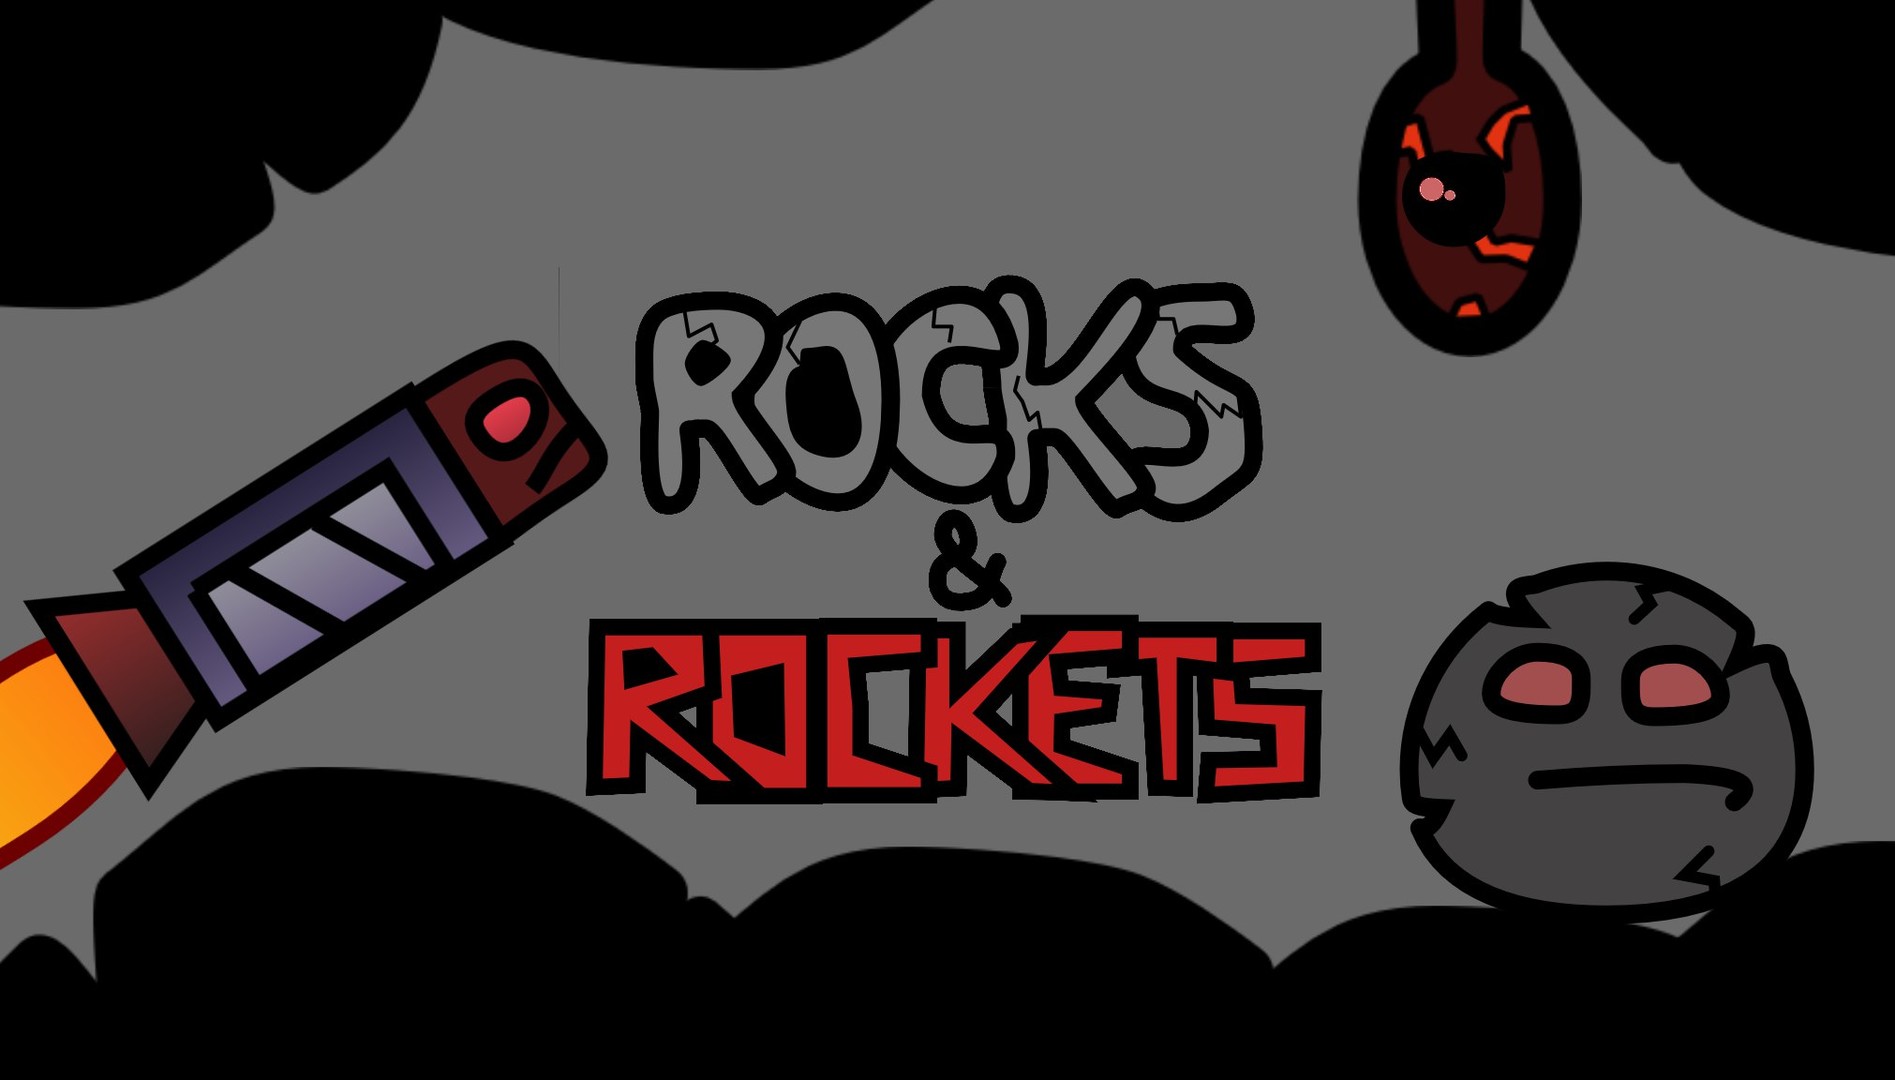 Rocks and Rockets Soundtrack Featured Screenshot #1